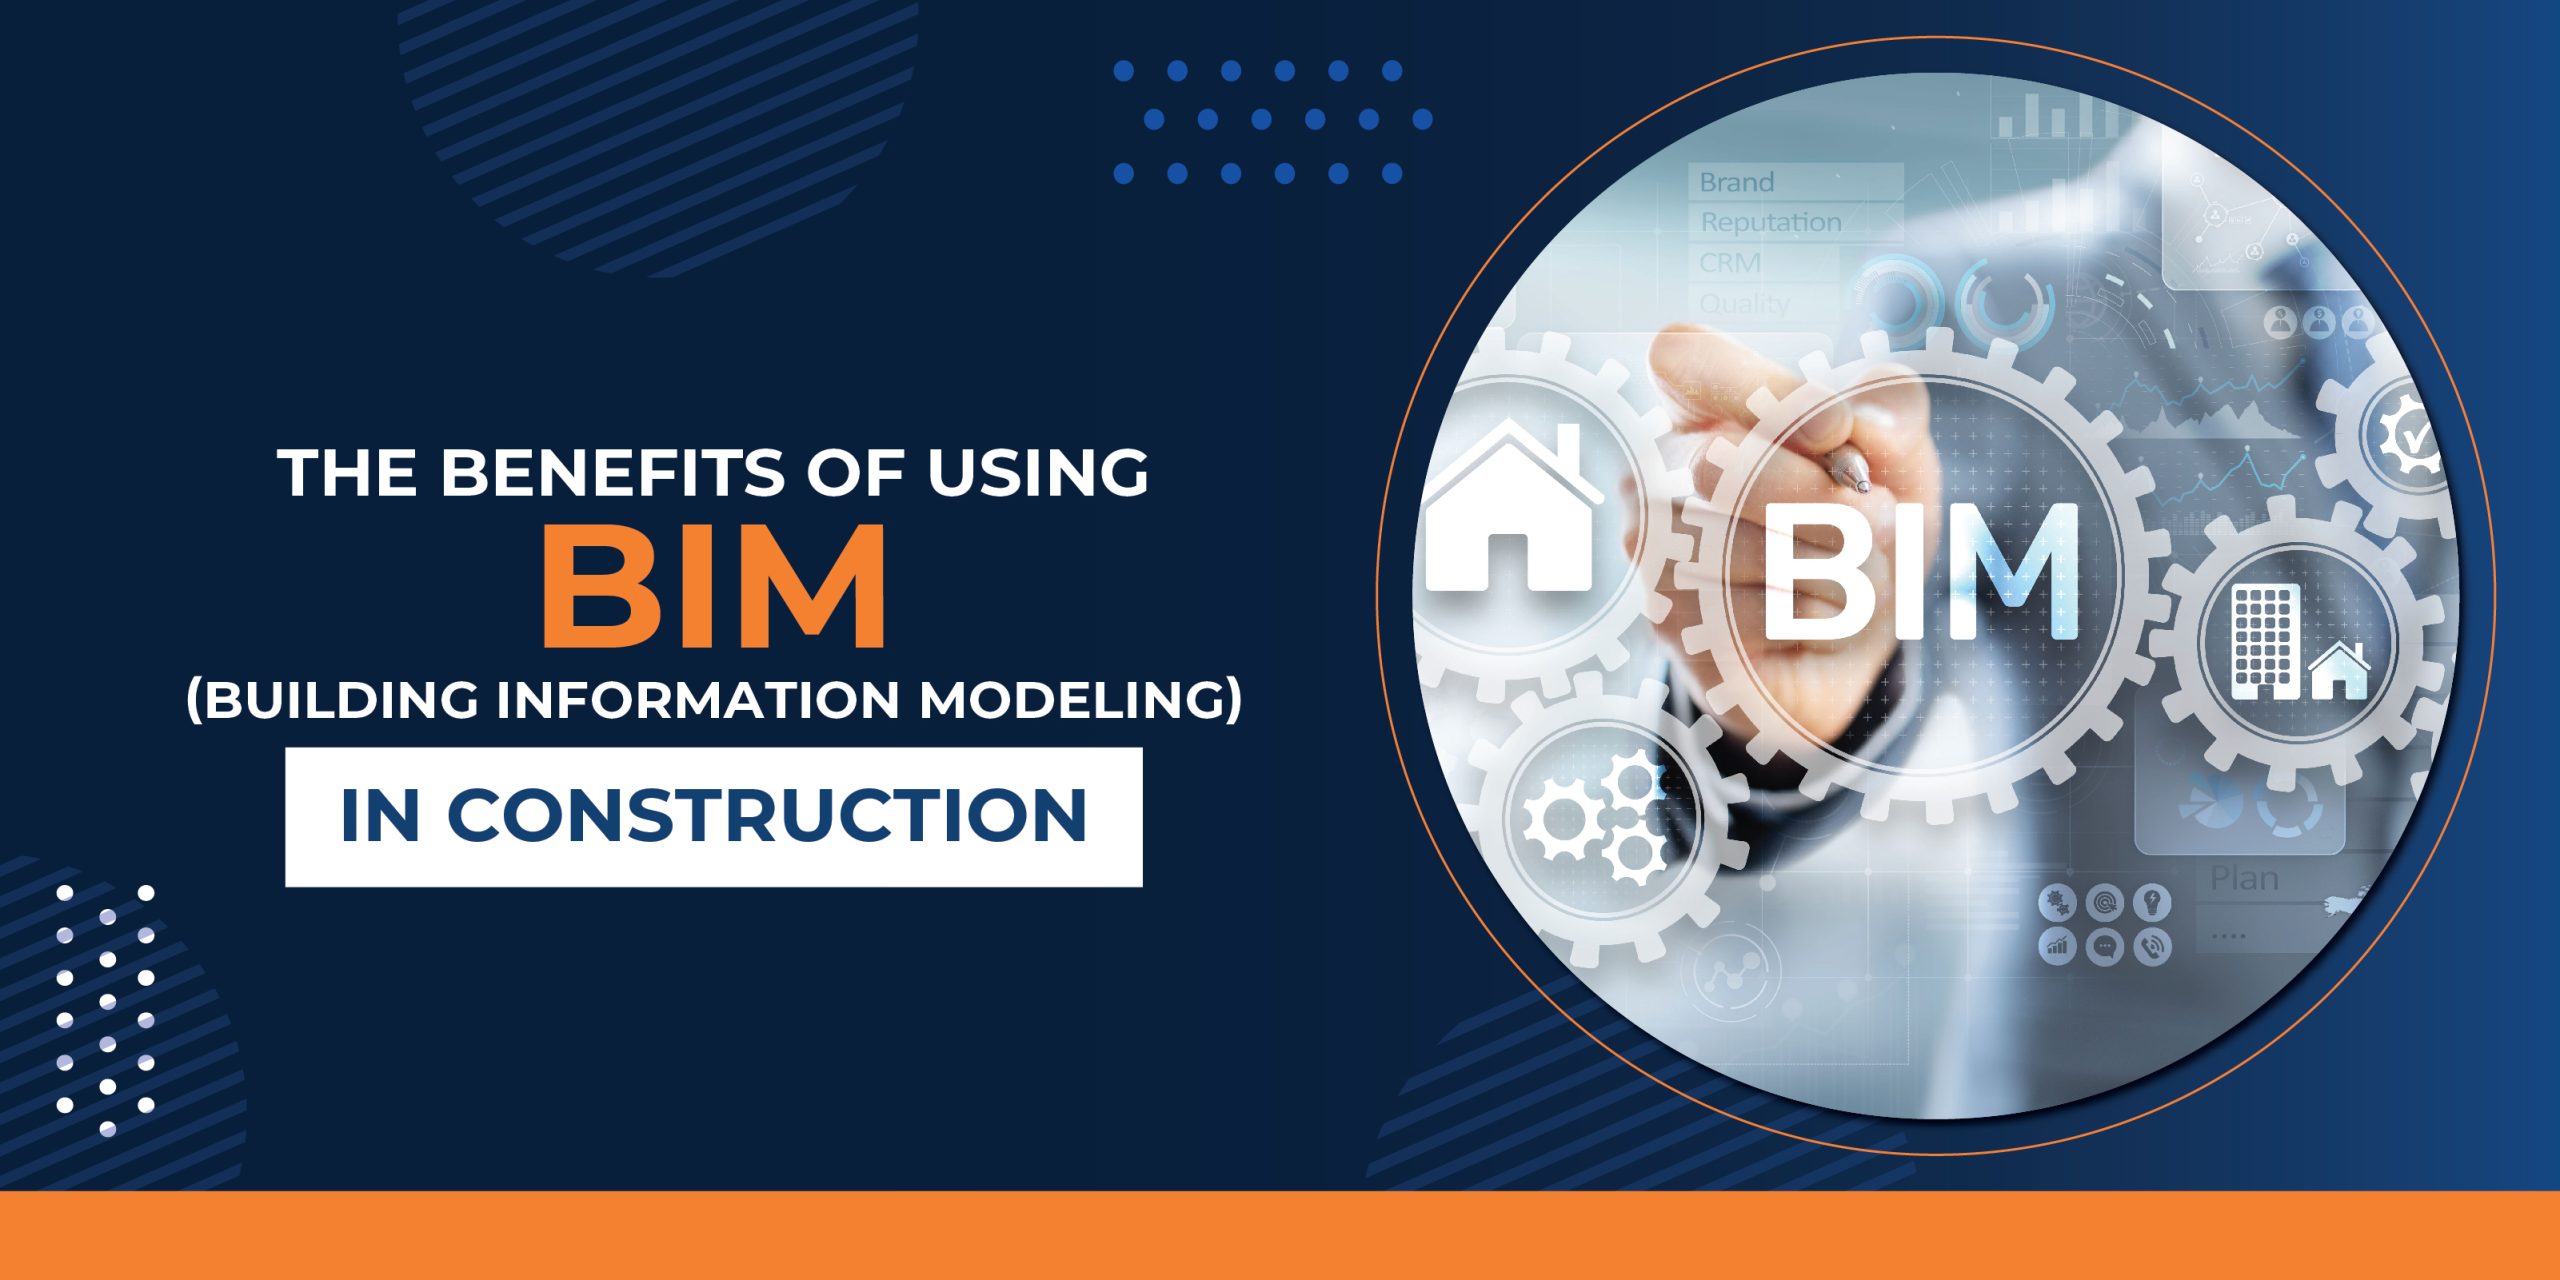 THE BENEFITS OF USING BIM BUILDING INFORMATION MODELING IN